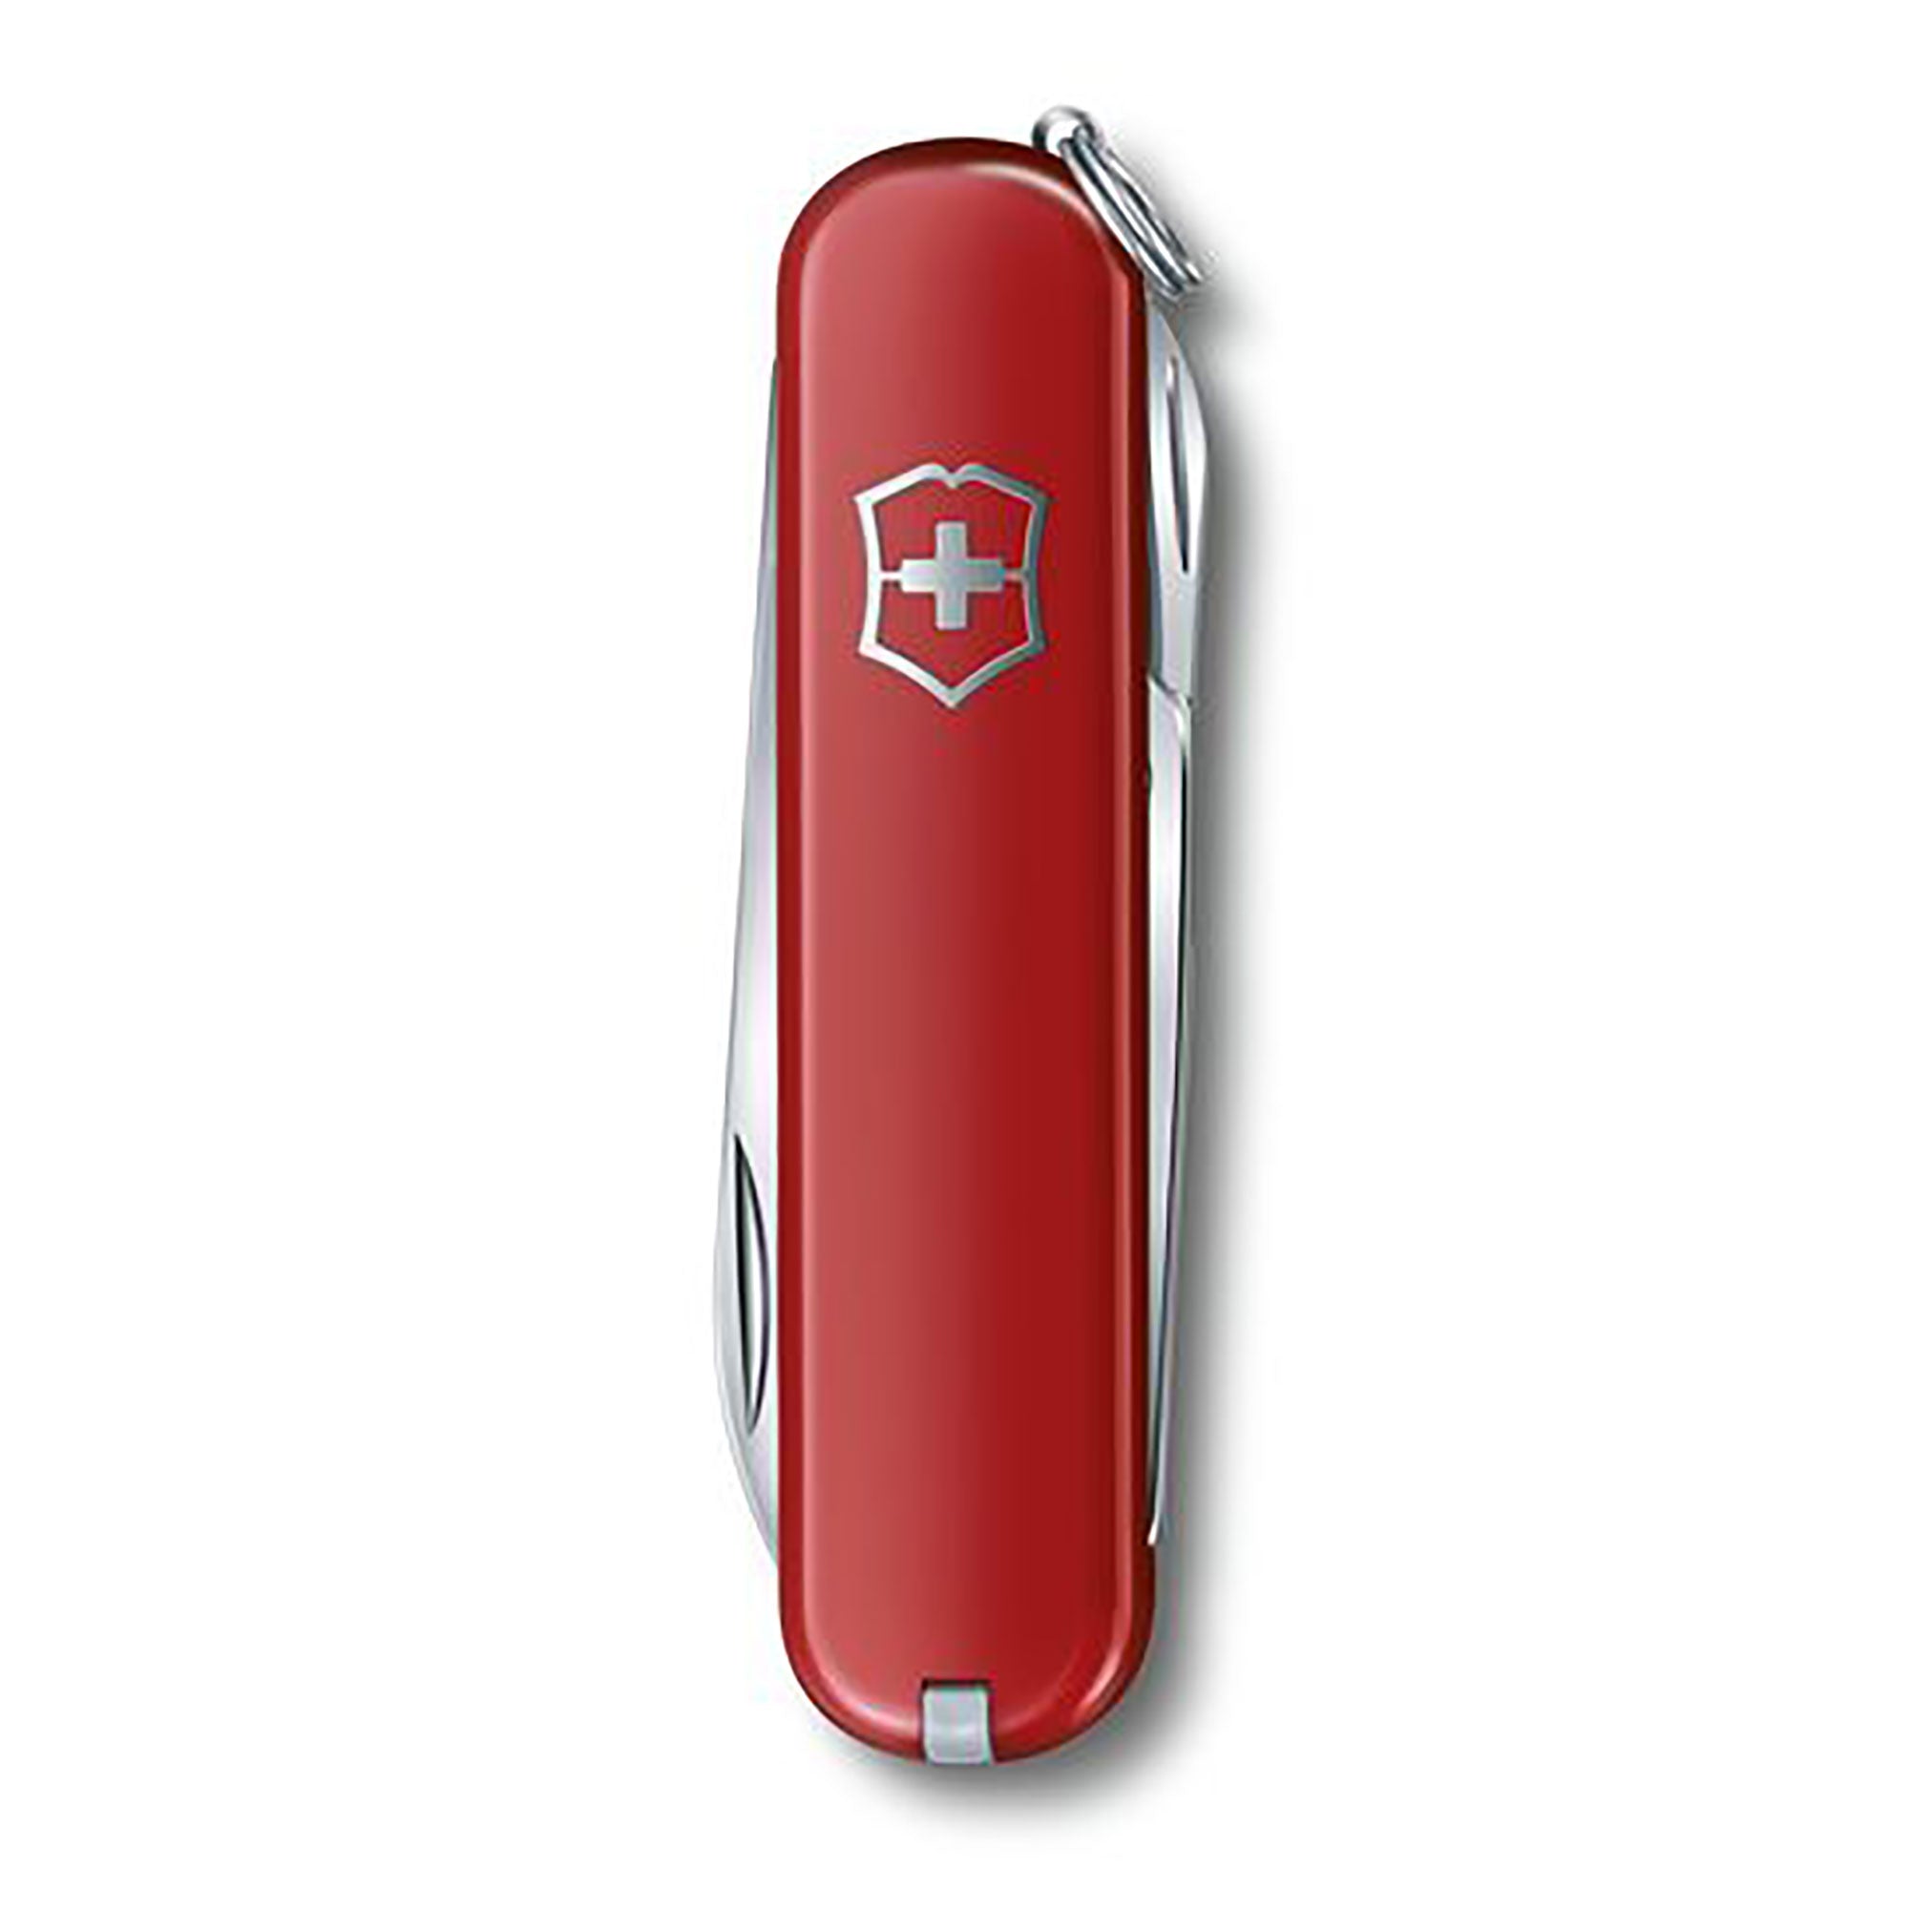 Victorinox Classic - Red - 7 Functions